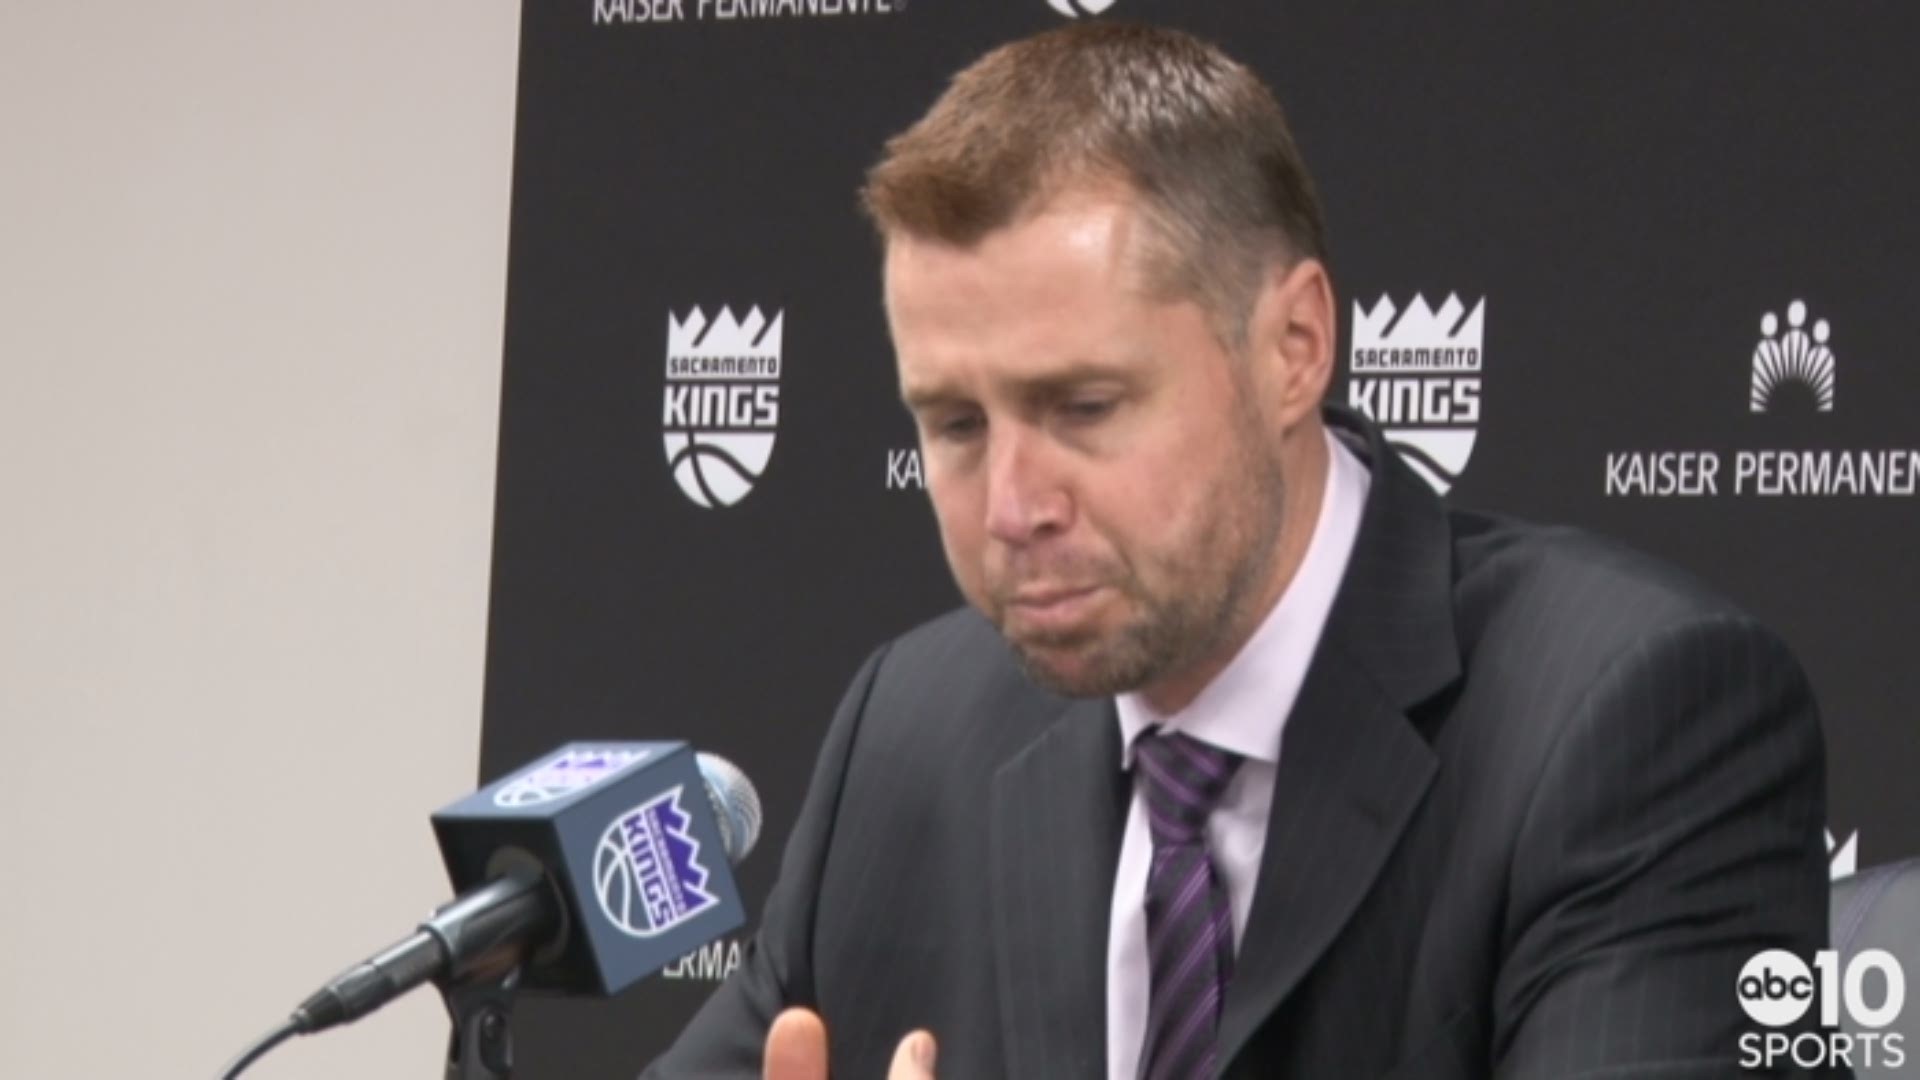 Kings head coach Dave Joerger talks about the strange environment inside Golden 1 Center with the arena being locked-down due to protests for the police shooting death of Stephon Clark.